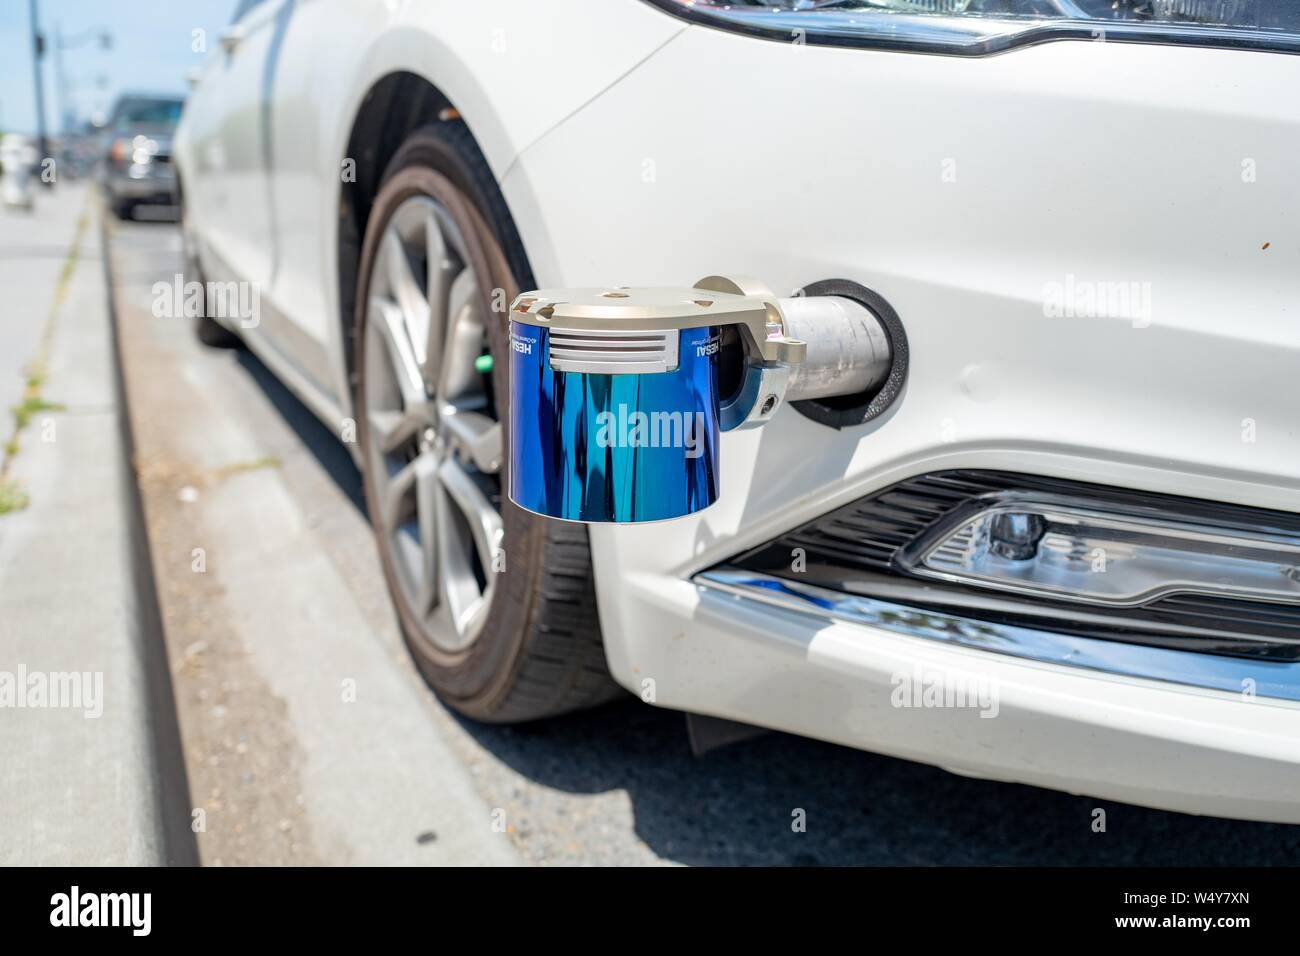 Close-up of bumper of self-driving car, with HESAI 40 channel Lidar sensor visible, in the Mission Bay neighborhood of San Francisco, California, June 10, 2019. () Stock Photo